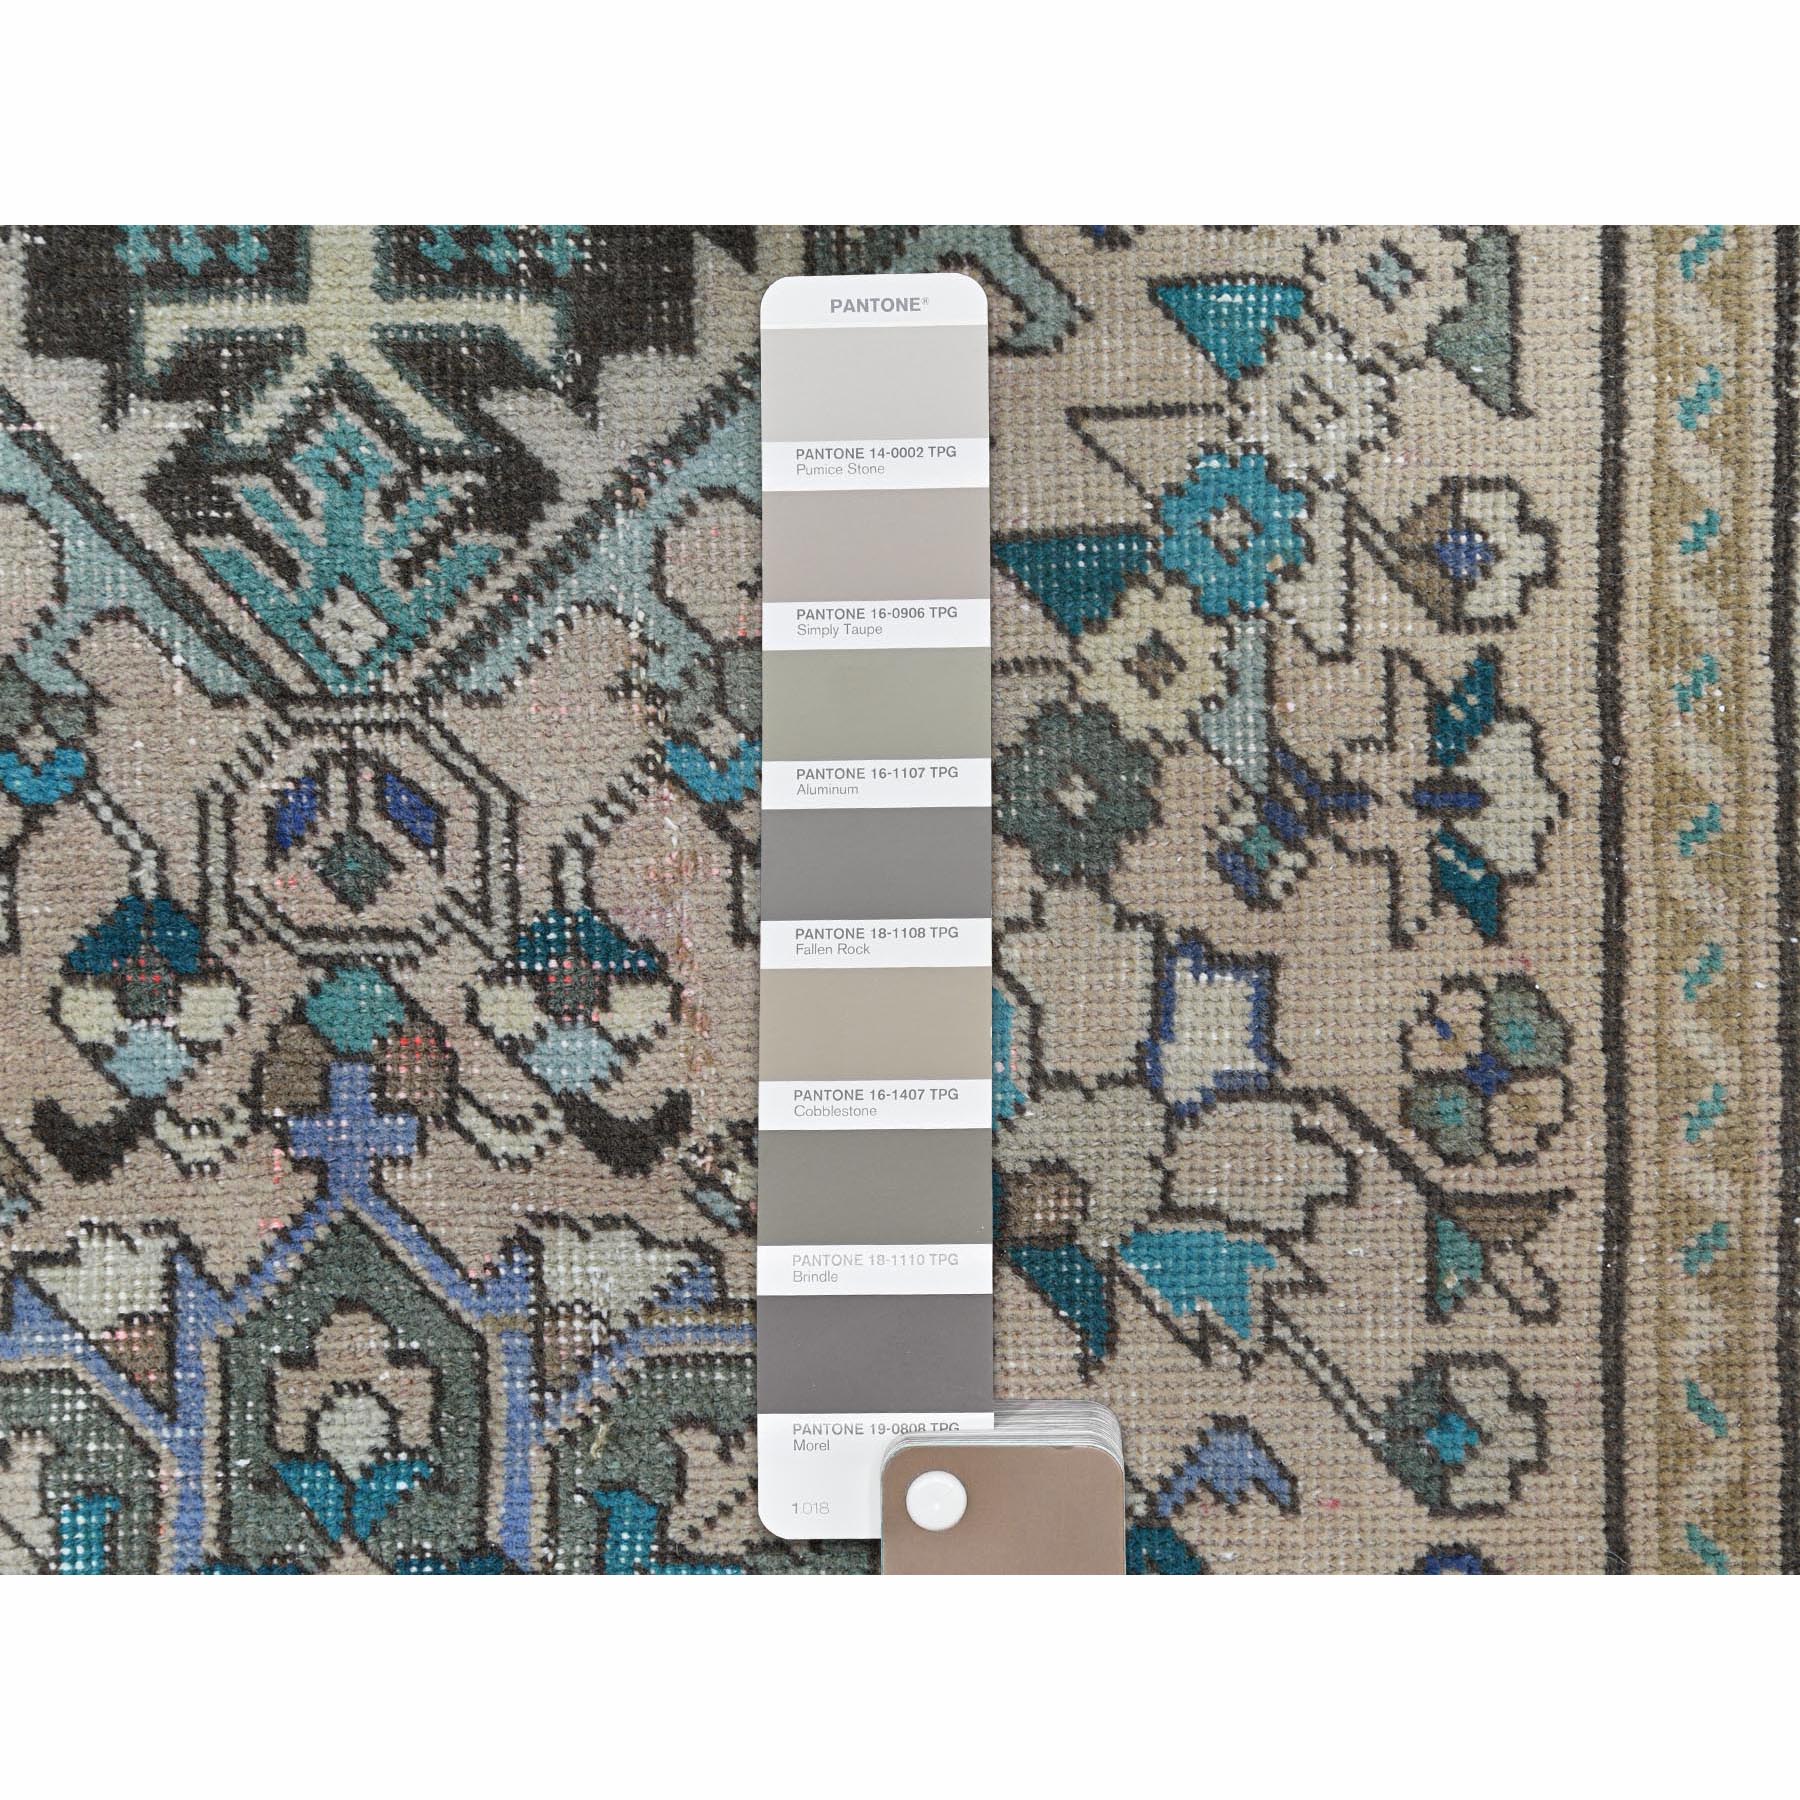 3'x12'4" Vintage Beige with Pop of Blue and Teal Persian Karajeh Sheared Low Clean Hand Woven Natural Wool Runner Oriental Rug 